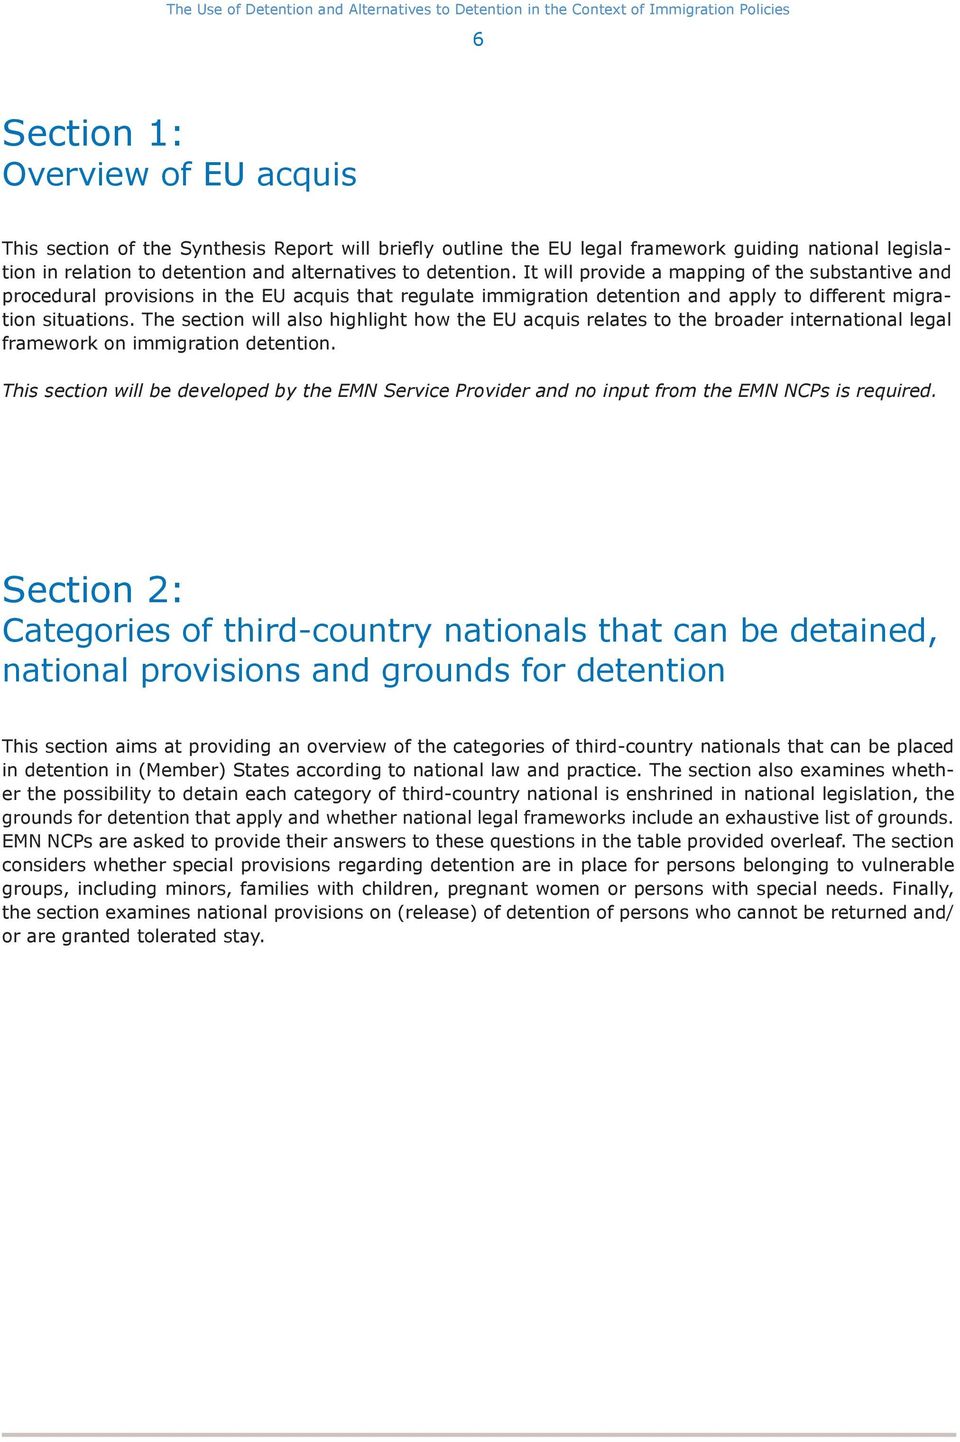 The section will also highlight how the EU acquis relates to the broader international legal framework on immigration detention.